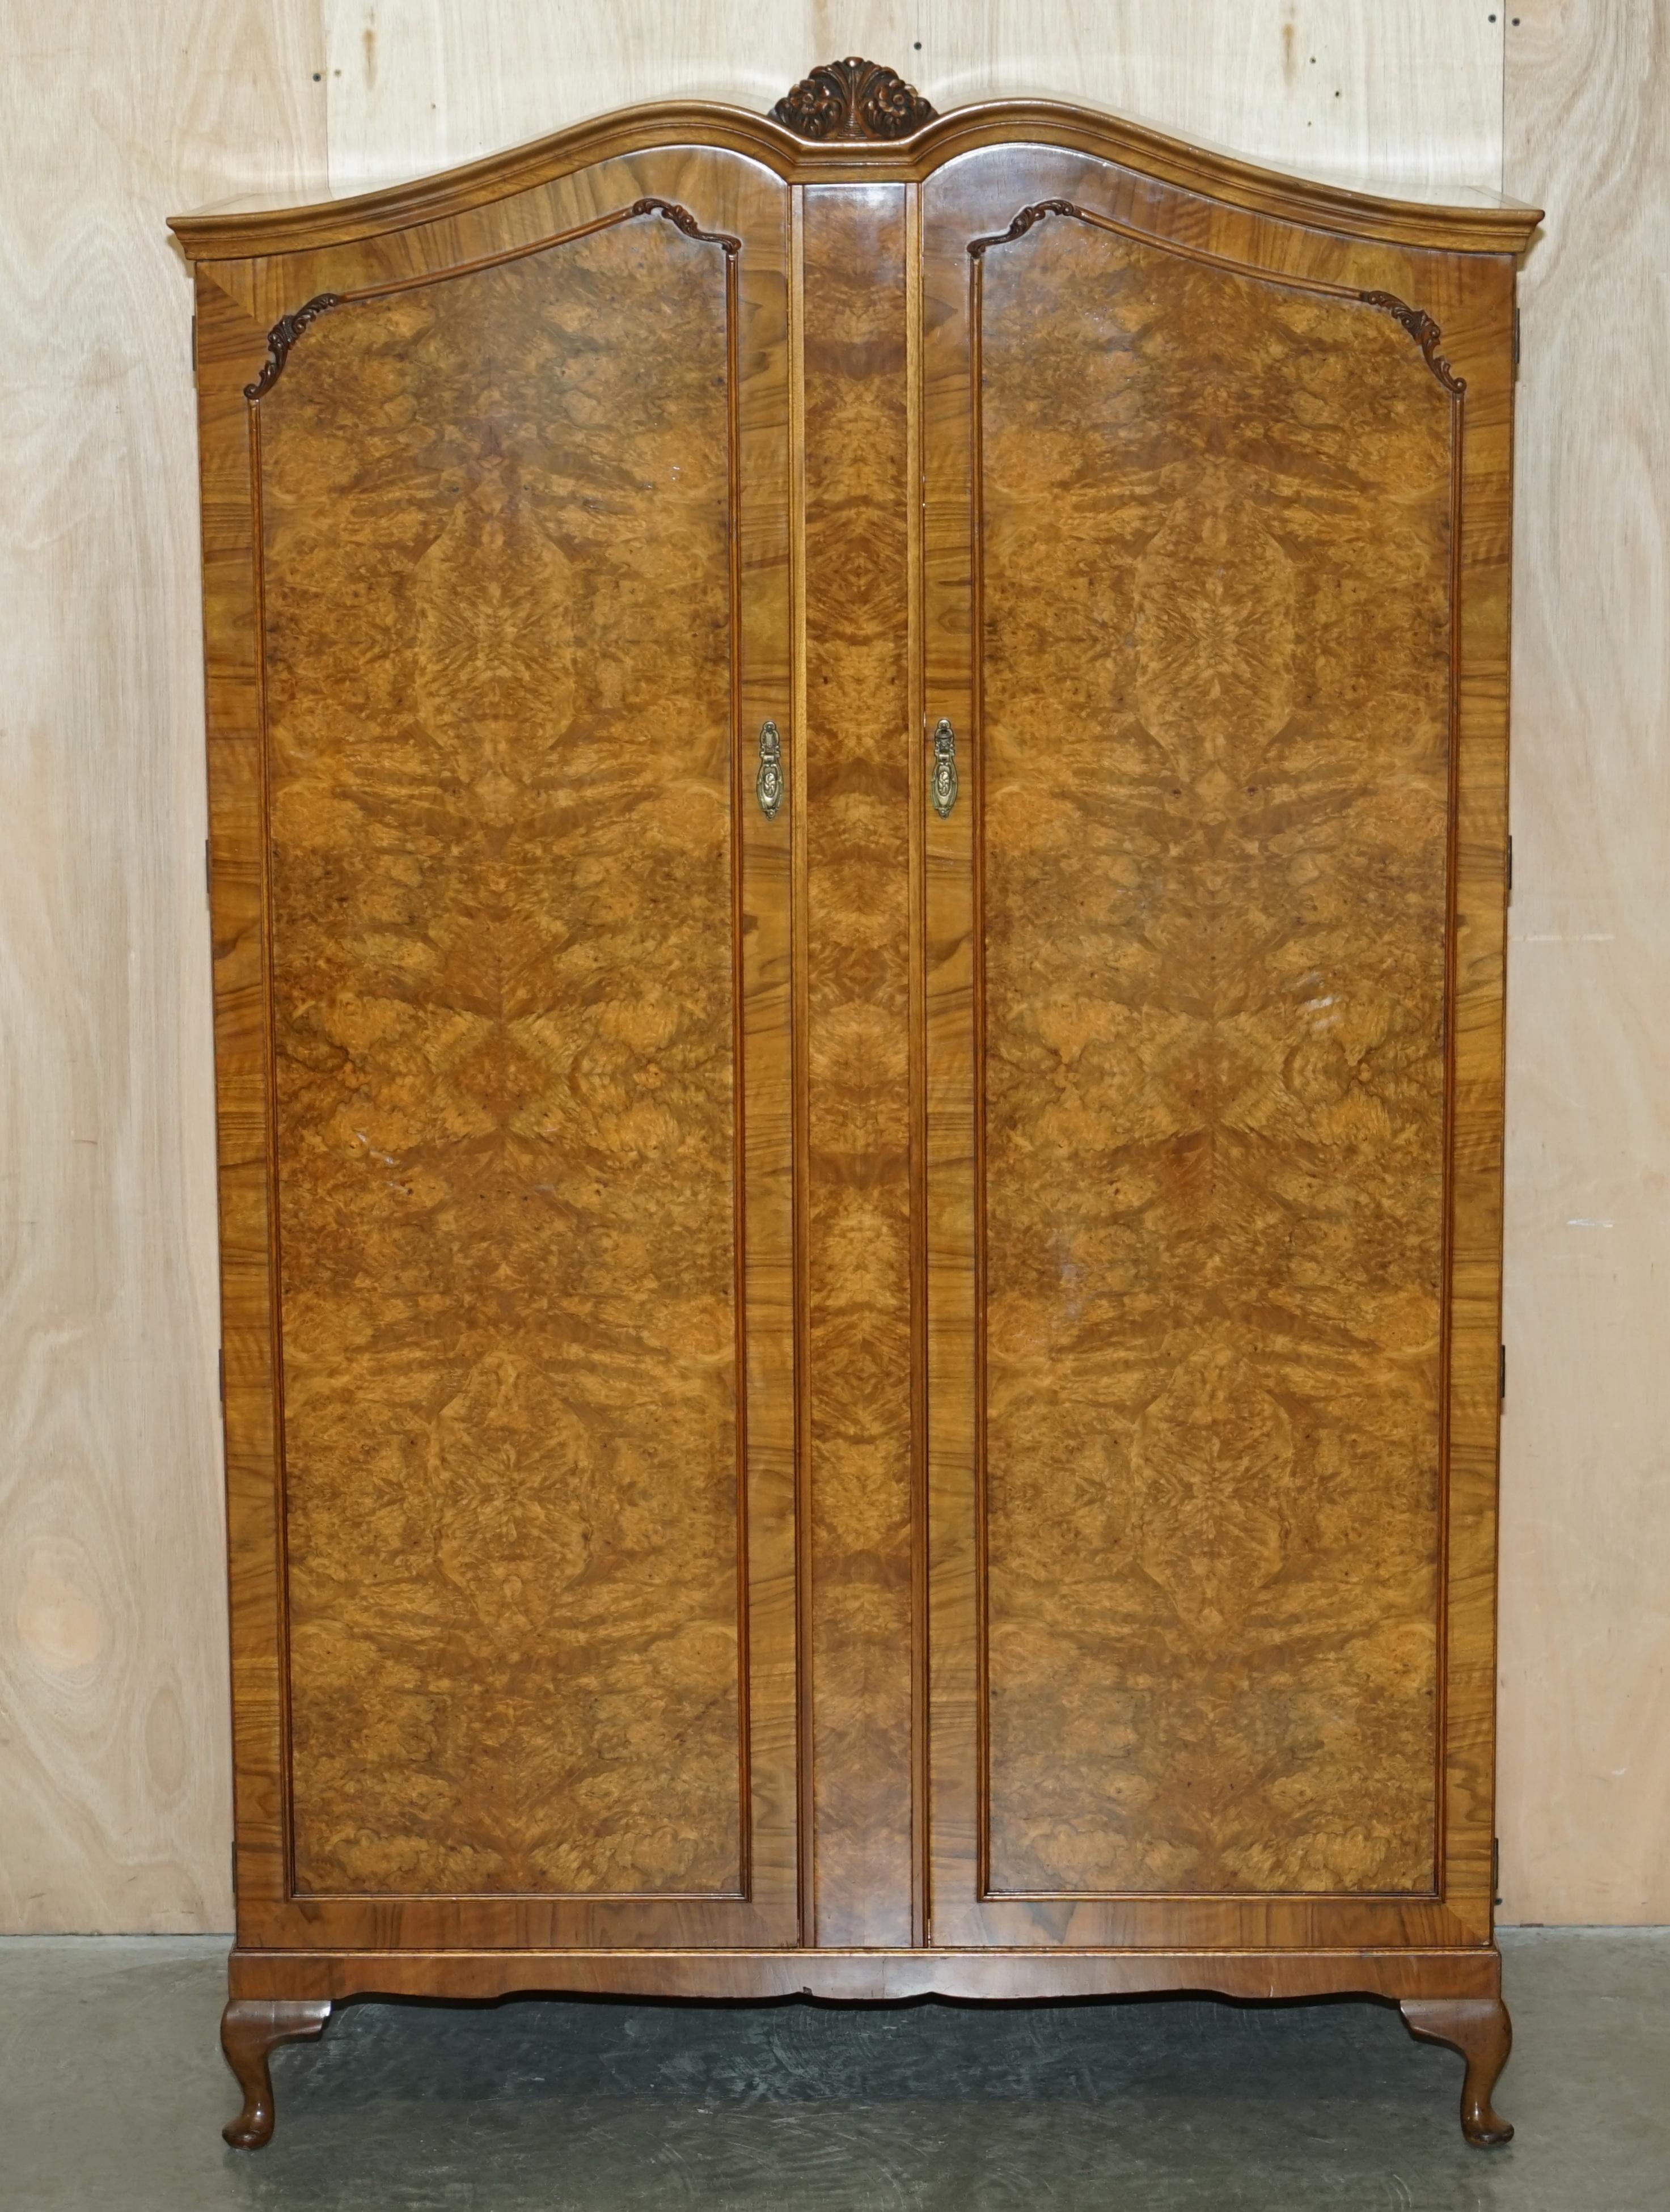 Royal House Antiques

Royal House Antiques is delighted to offer for sale this stunning, original circa 1940’s Alfred Cox Art Deco large Wardrobe which is part of a suite

Please note the delivery fee listed is just a guide, it covers within the